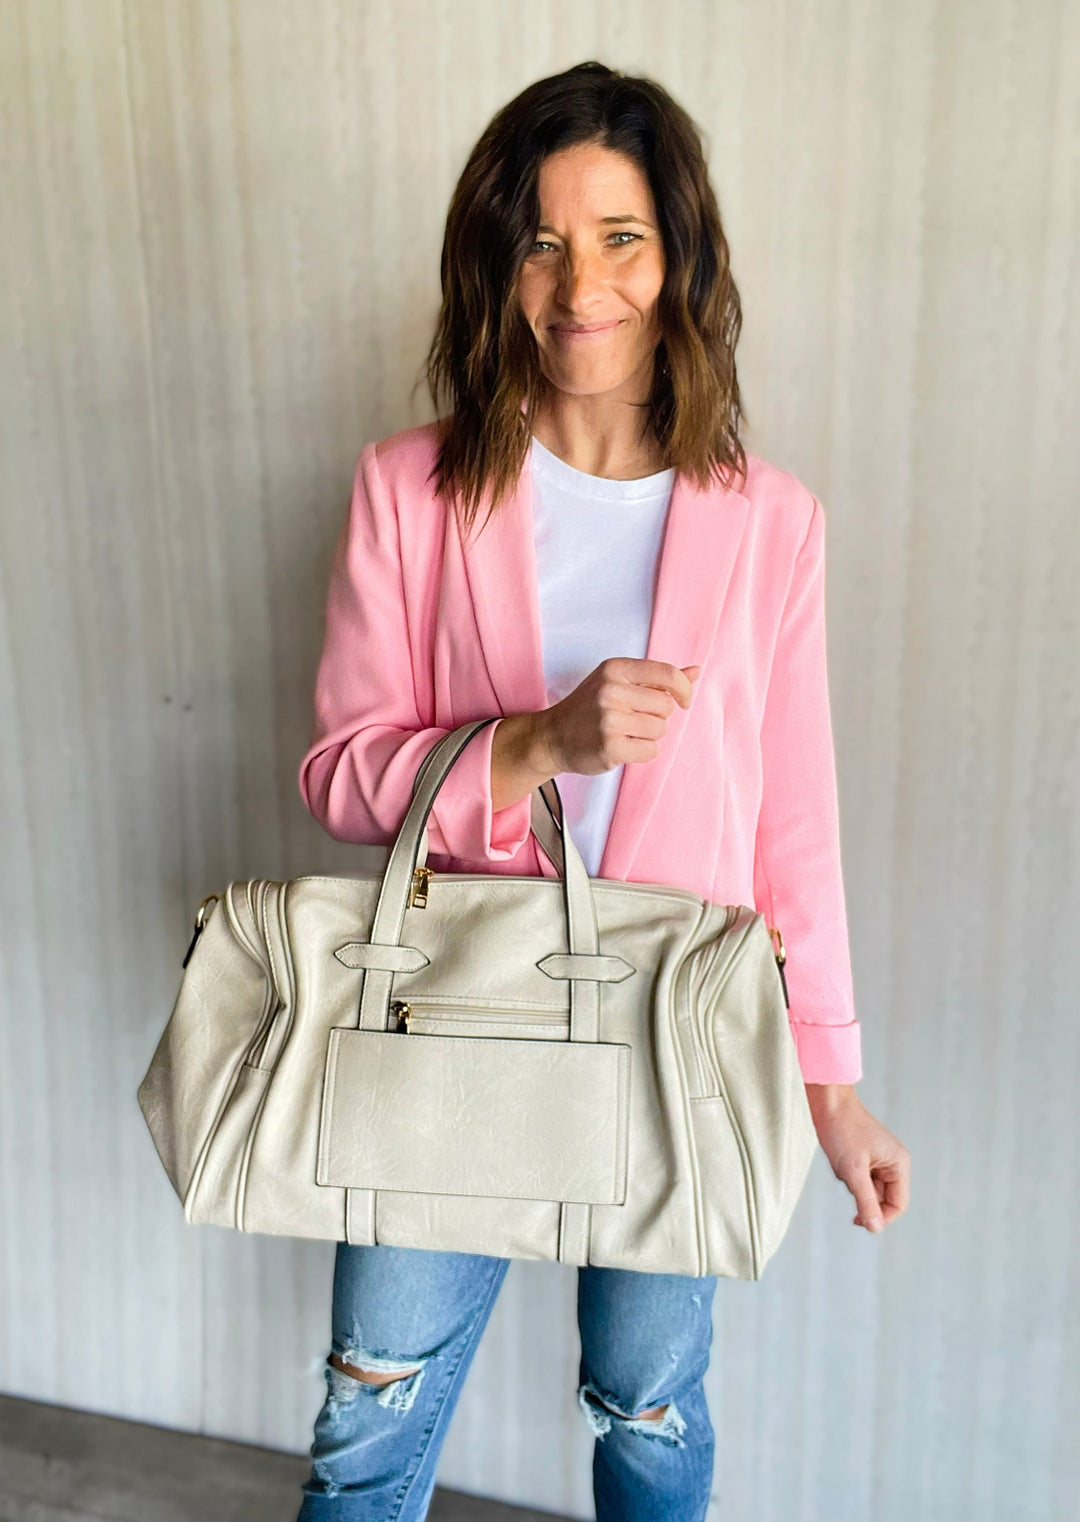 Women's Ivory Weekender Bag - perfect for traveling!